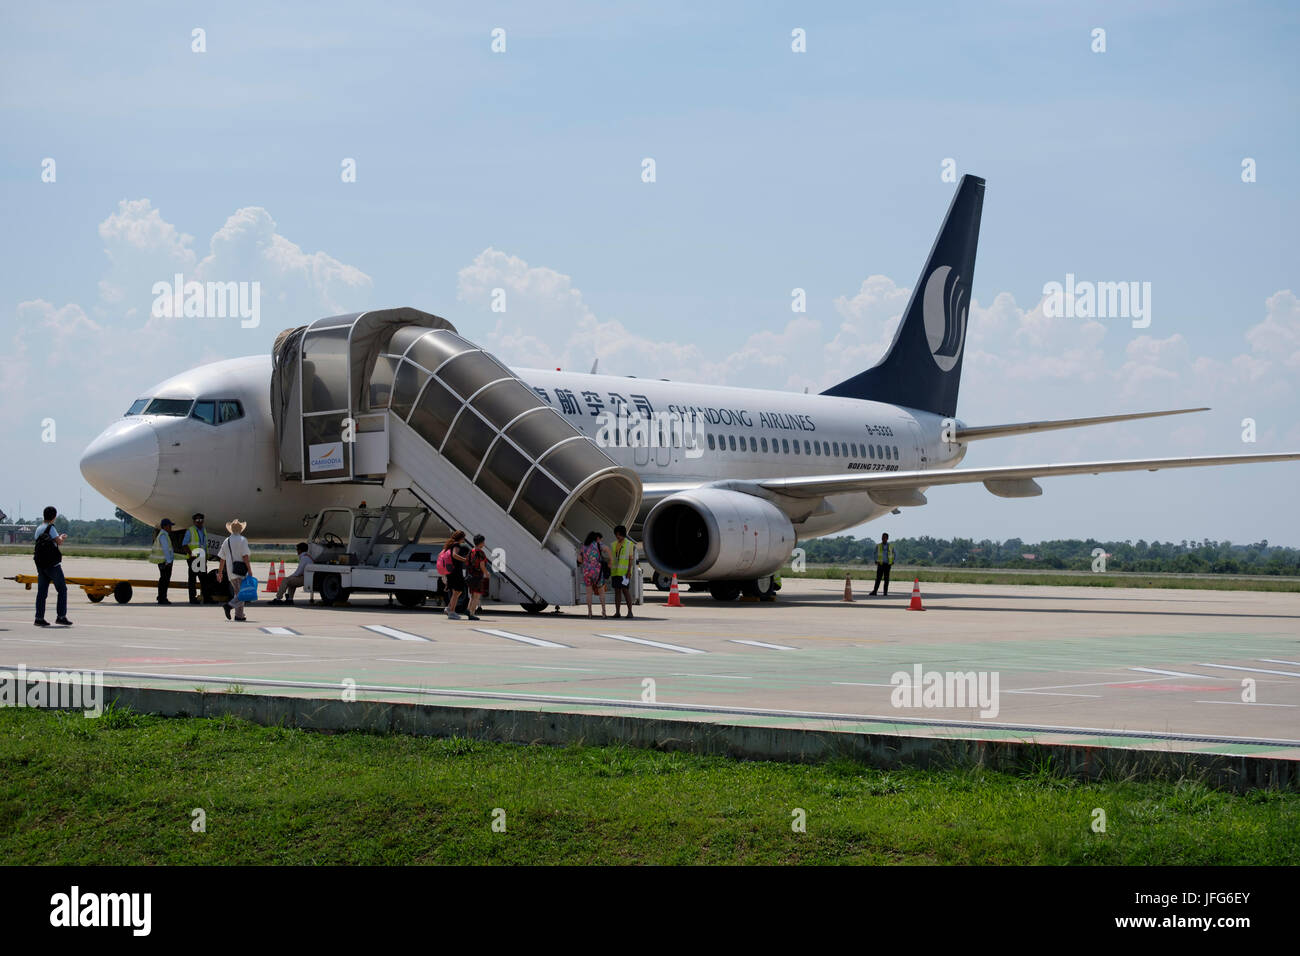 Shandong Airlines airplane Stock Photo